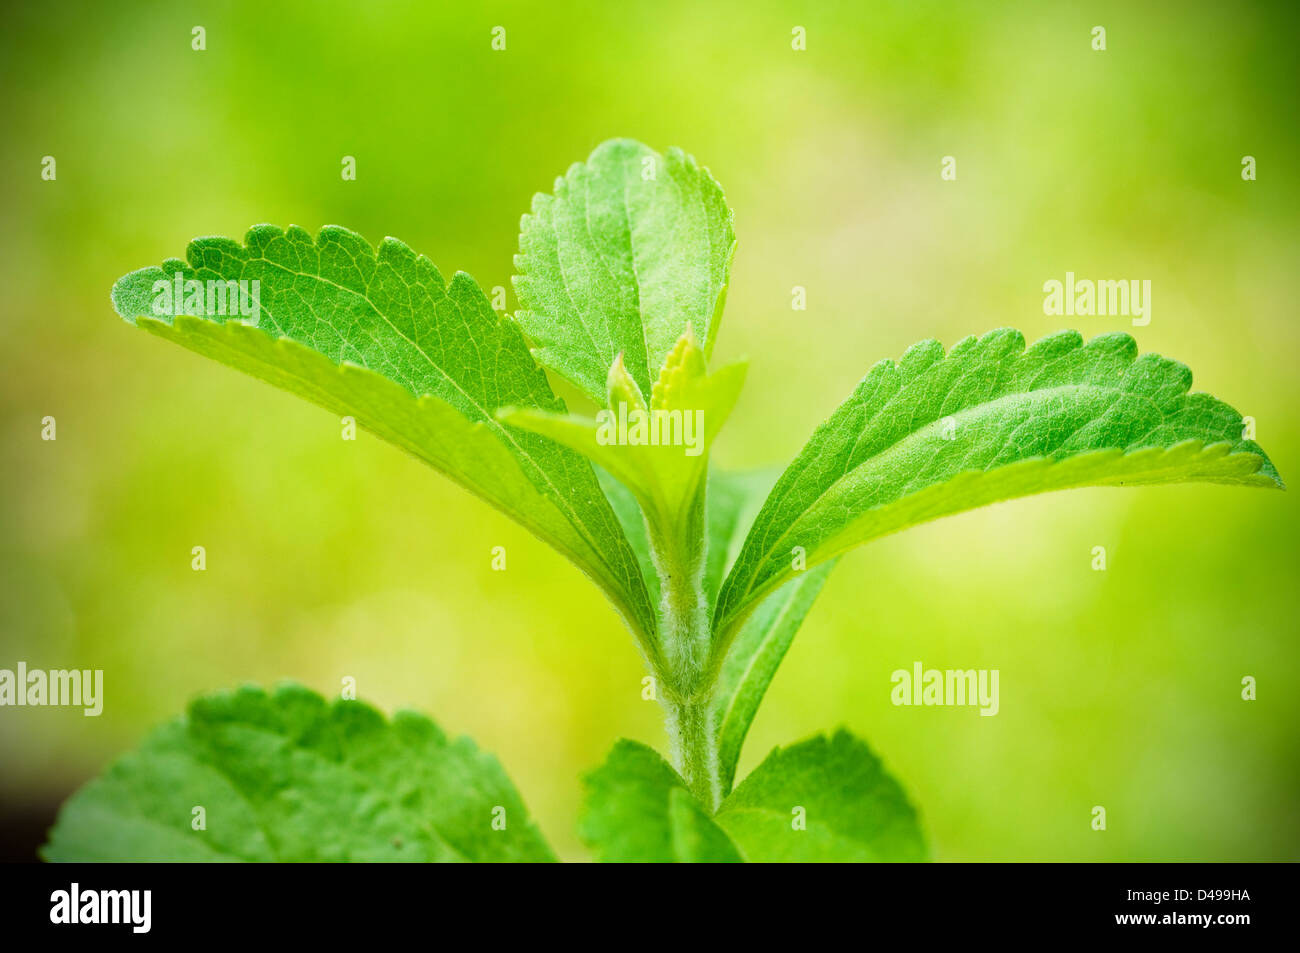 stevia rebaudiana branch close up over a green background Stock Photo